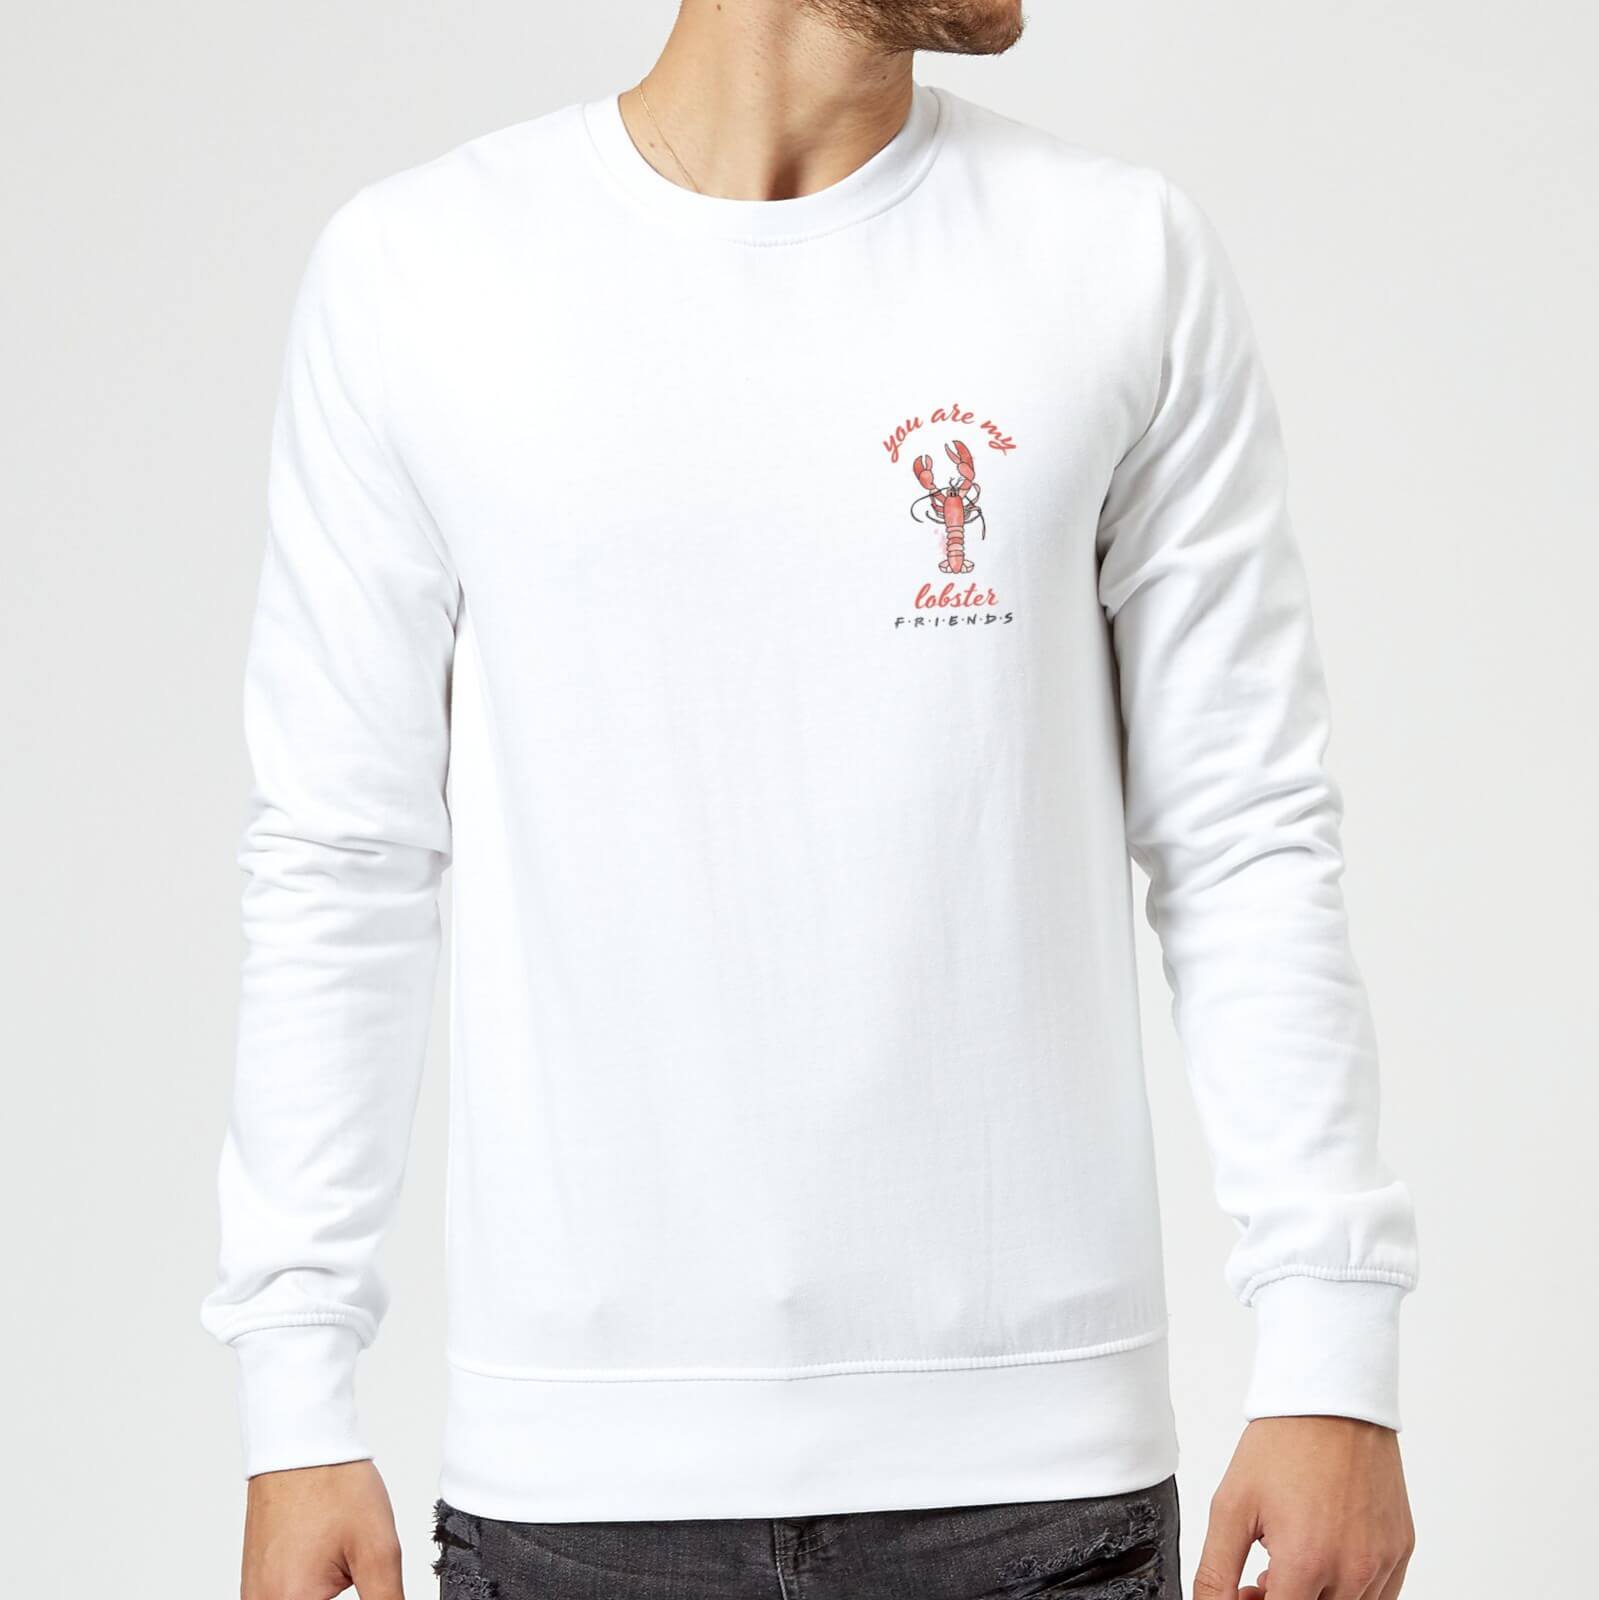 Friends You Are My Lobster Sweatshirt - White - S